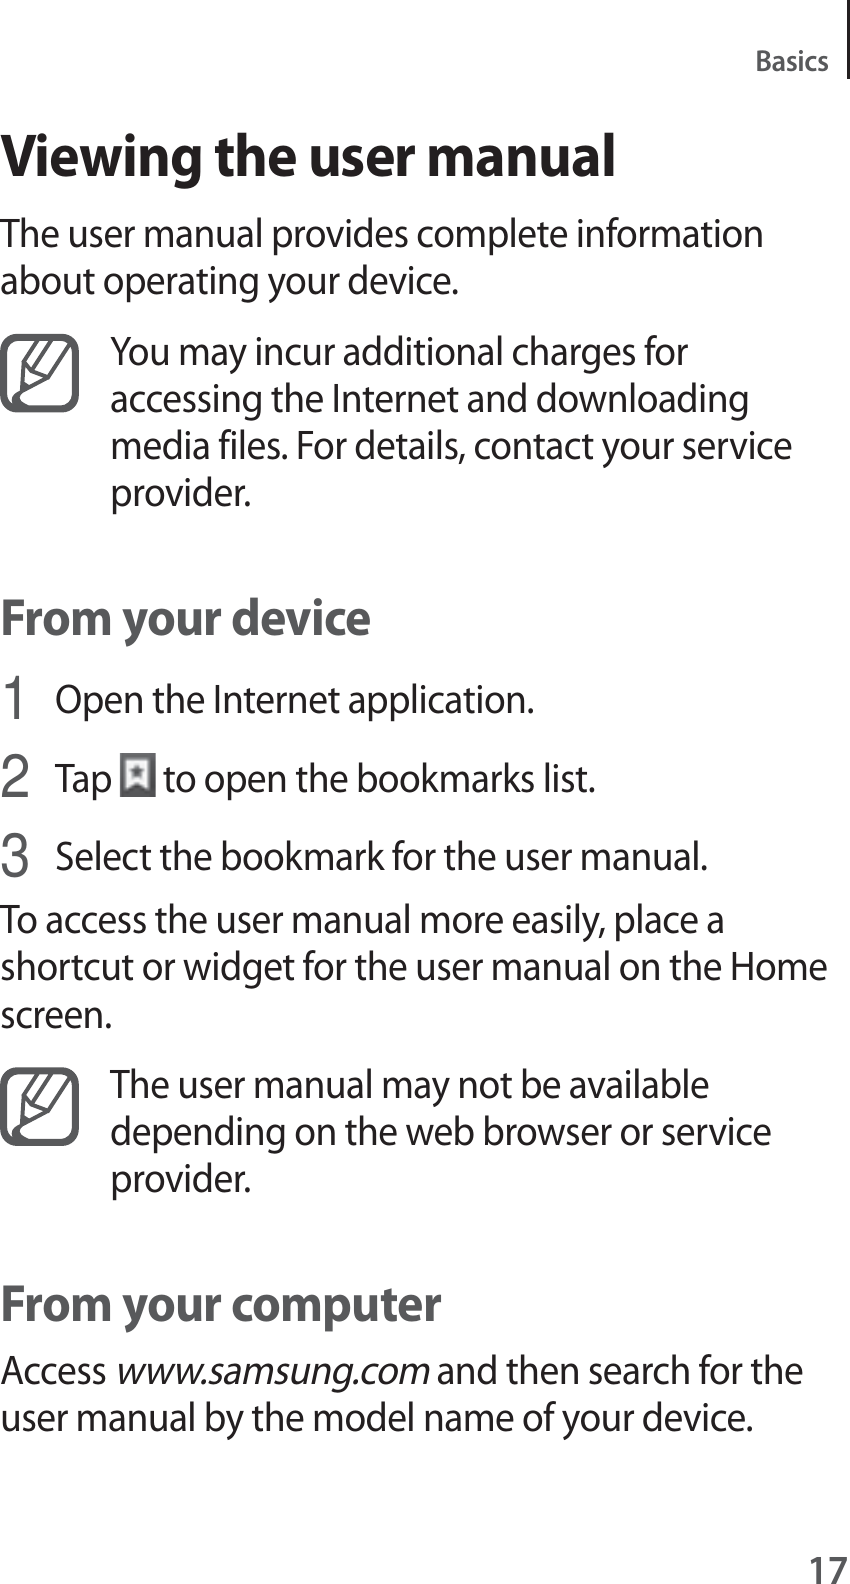 17BasicsViewing the user manualThe user manual provides complete information about operating your device.You may incur additional charges for accessing the Internet and downloading media files. For details, contact your service provider.From your device1Open the Internet application.2Tap   to open the bookmarks list.3Select the bookmark for the user manual.To access the user manual more easily, place a shortcut or widget for the user manual on the Home screen.The user manual may not be available depending on the web browser or service provider.From your computerAccess www.samsung.com and then search for the user manual by the model name of your device.